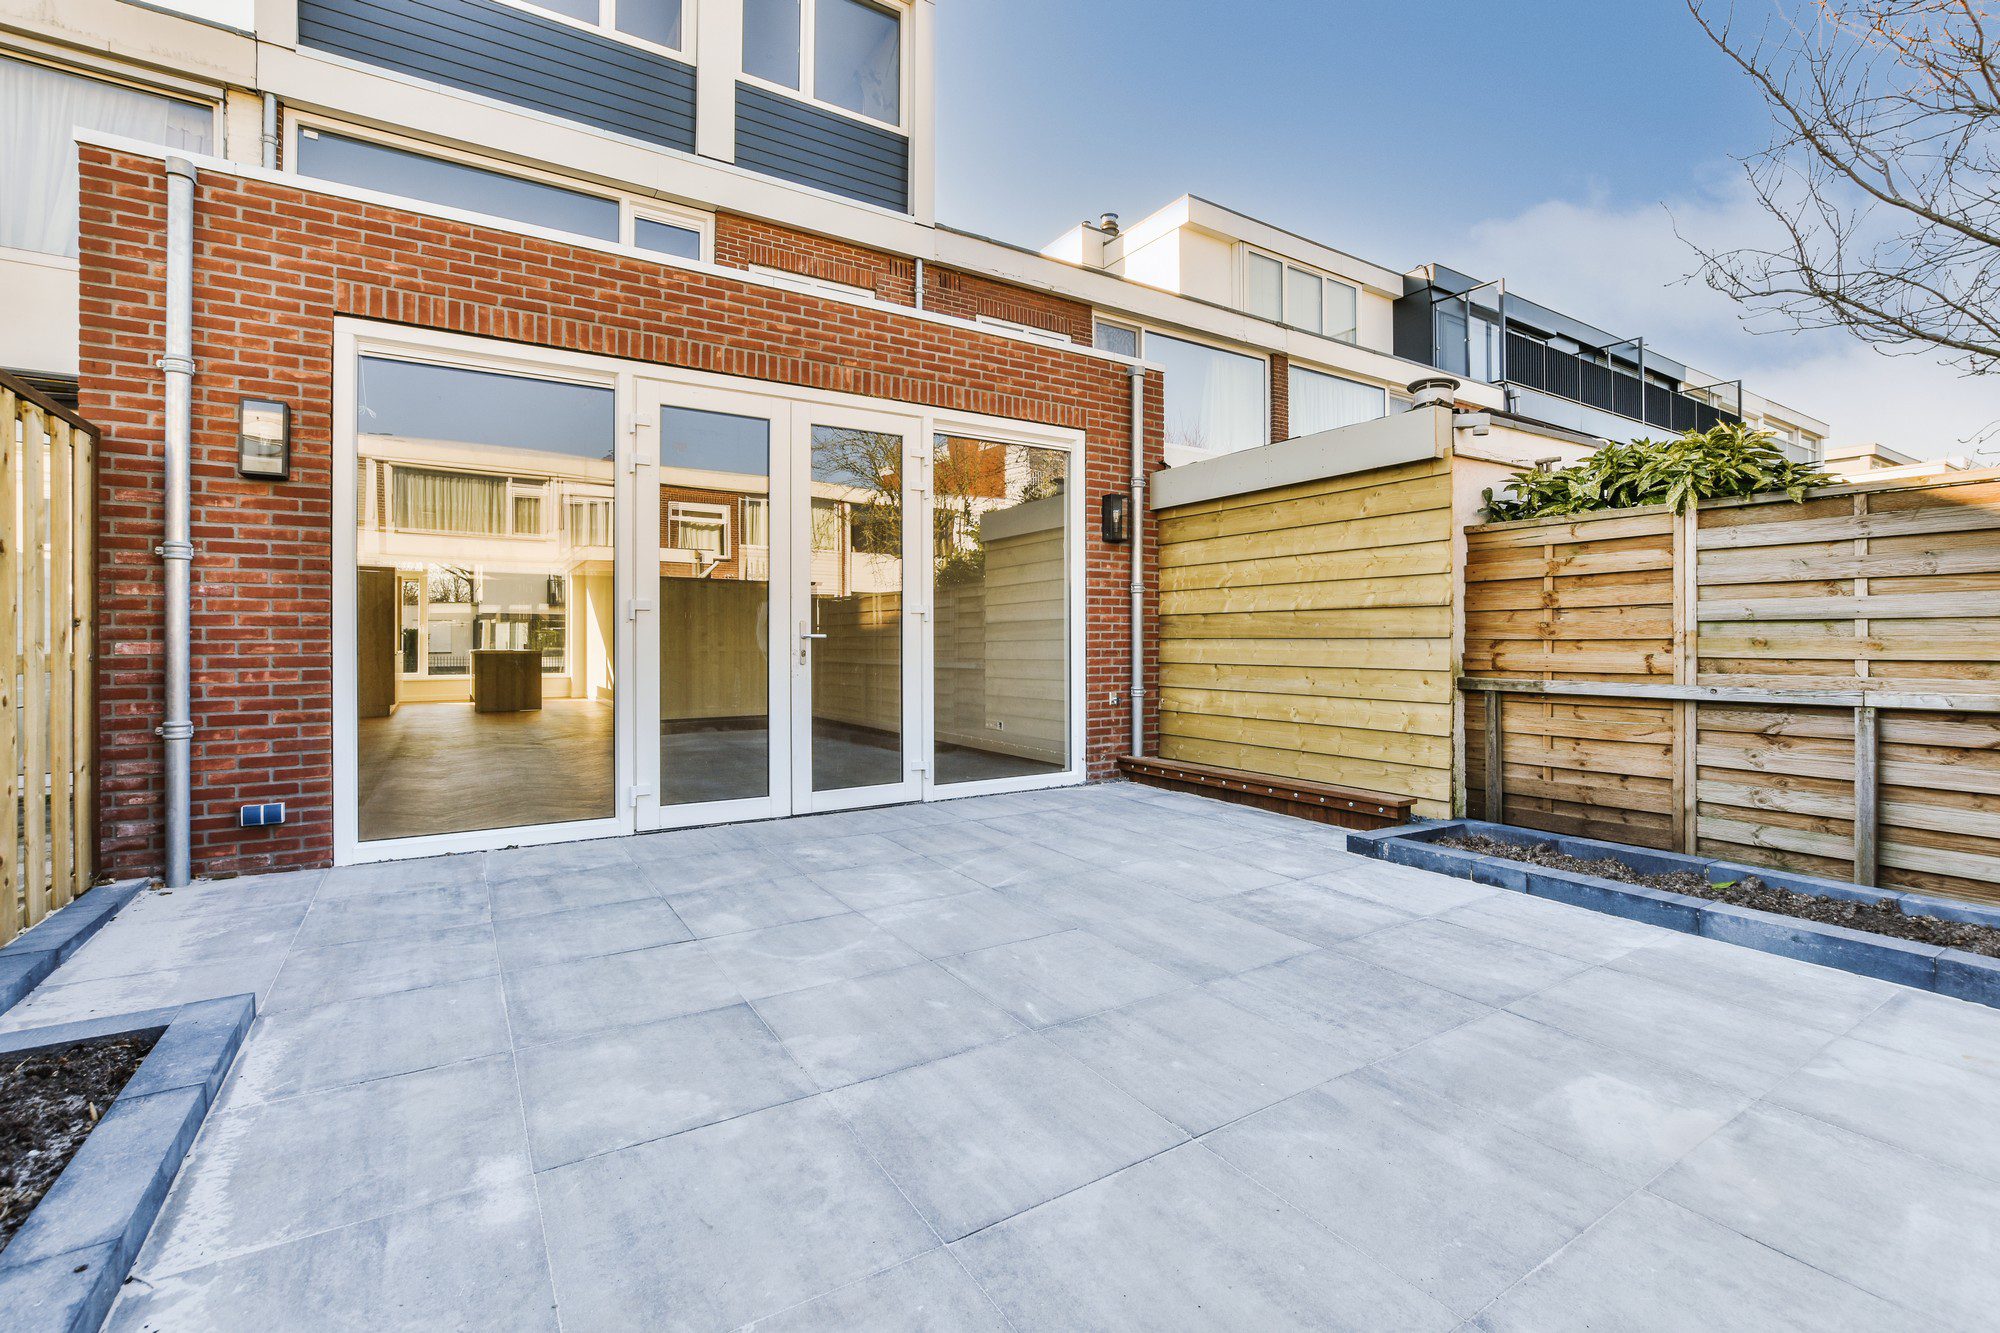 The image shows the outdoor patio area of a modern house during the daytime. The patio is constructed with large, square, smooth paving stones. To the right, there is a wooden slat fence, providing privacy to the area. The house itself has a combination of brickwork and siding, with large glass doors and windows that open onto the patio, offering a view into the interior living space of the home. Above the ground floor, you can see the upper story of the house with a balcony that features a glass balustrade. The sky is clear and blue, suggesting fair weather, which complements the outdoor living design of this space.